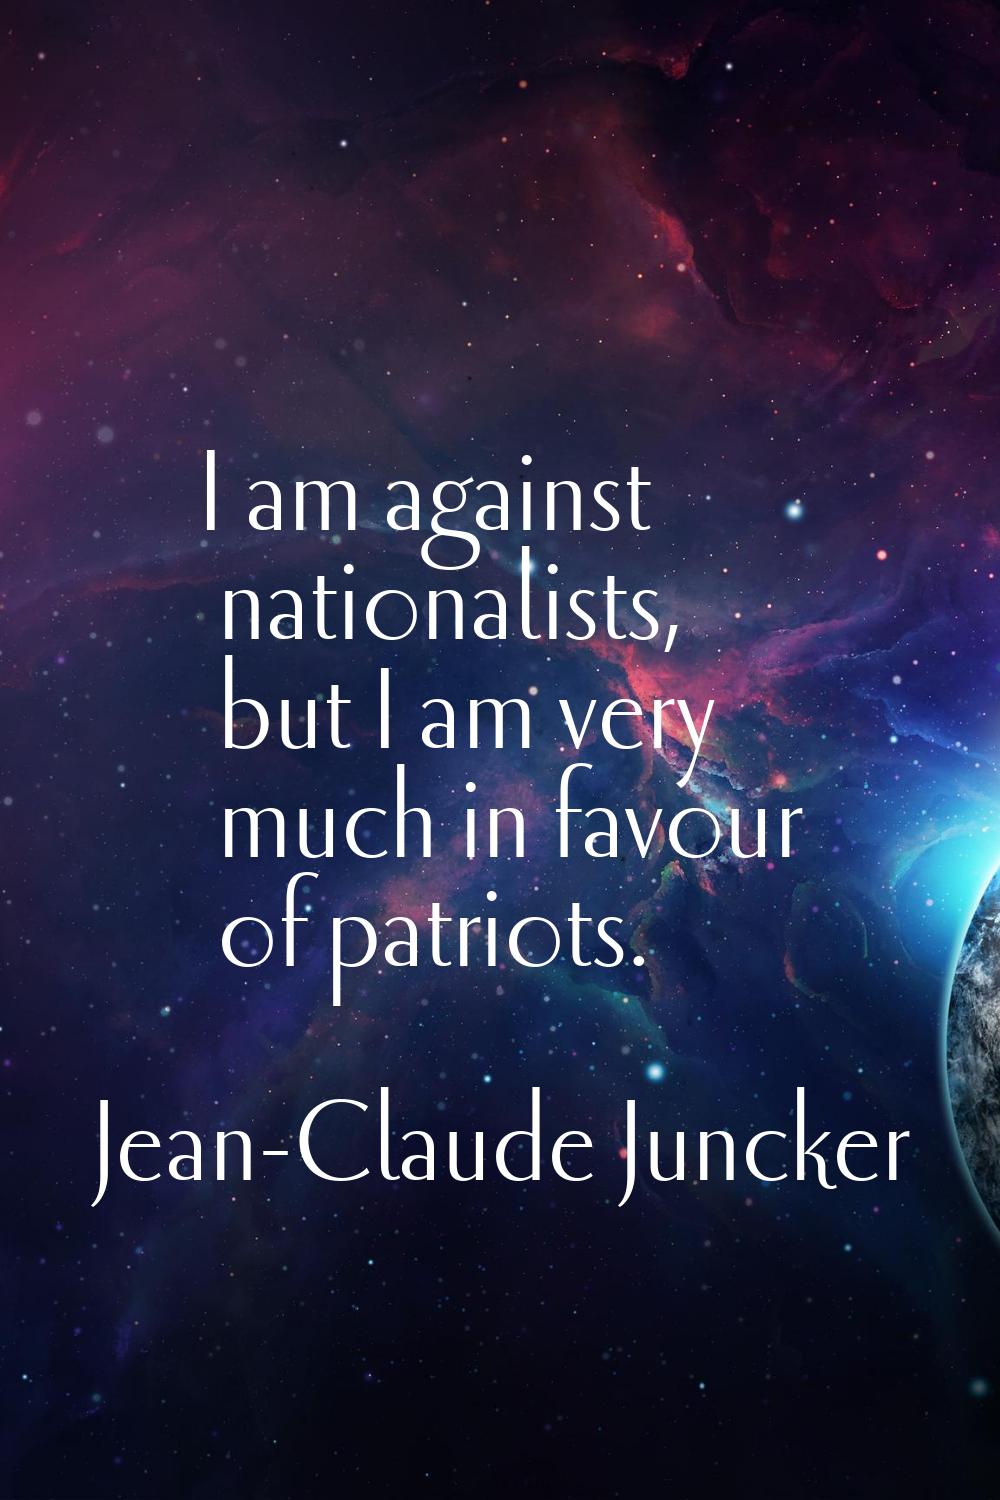 I am against nationalists, but I am very much in favour of patriots.